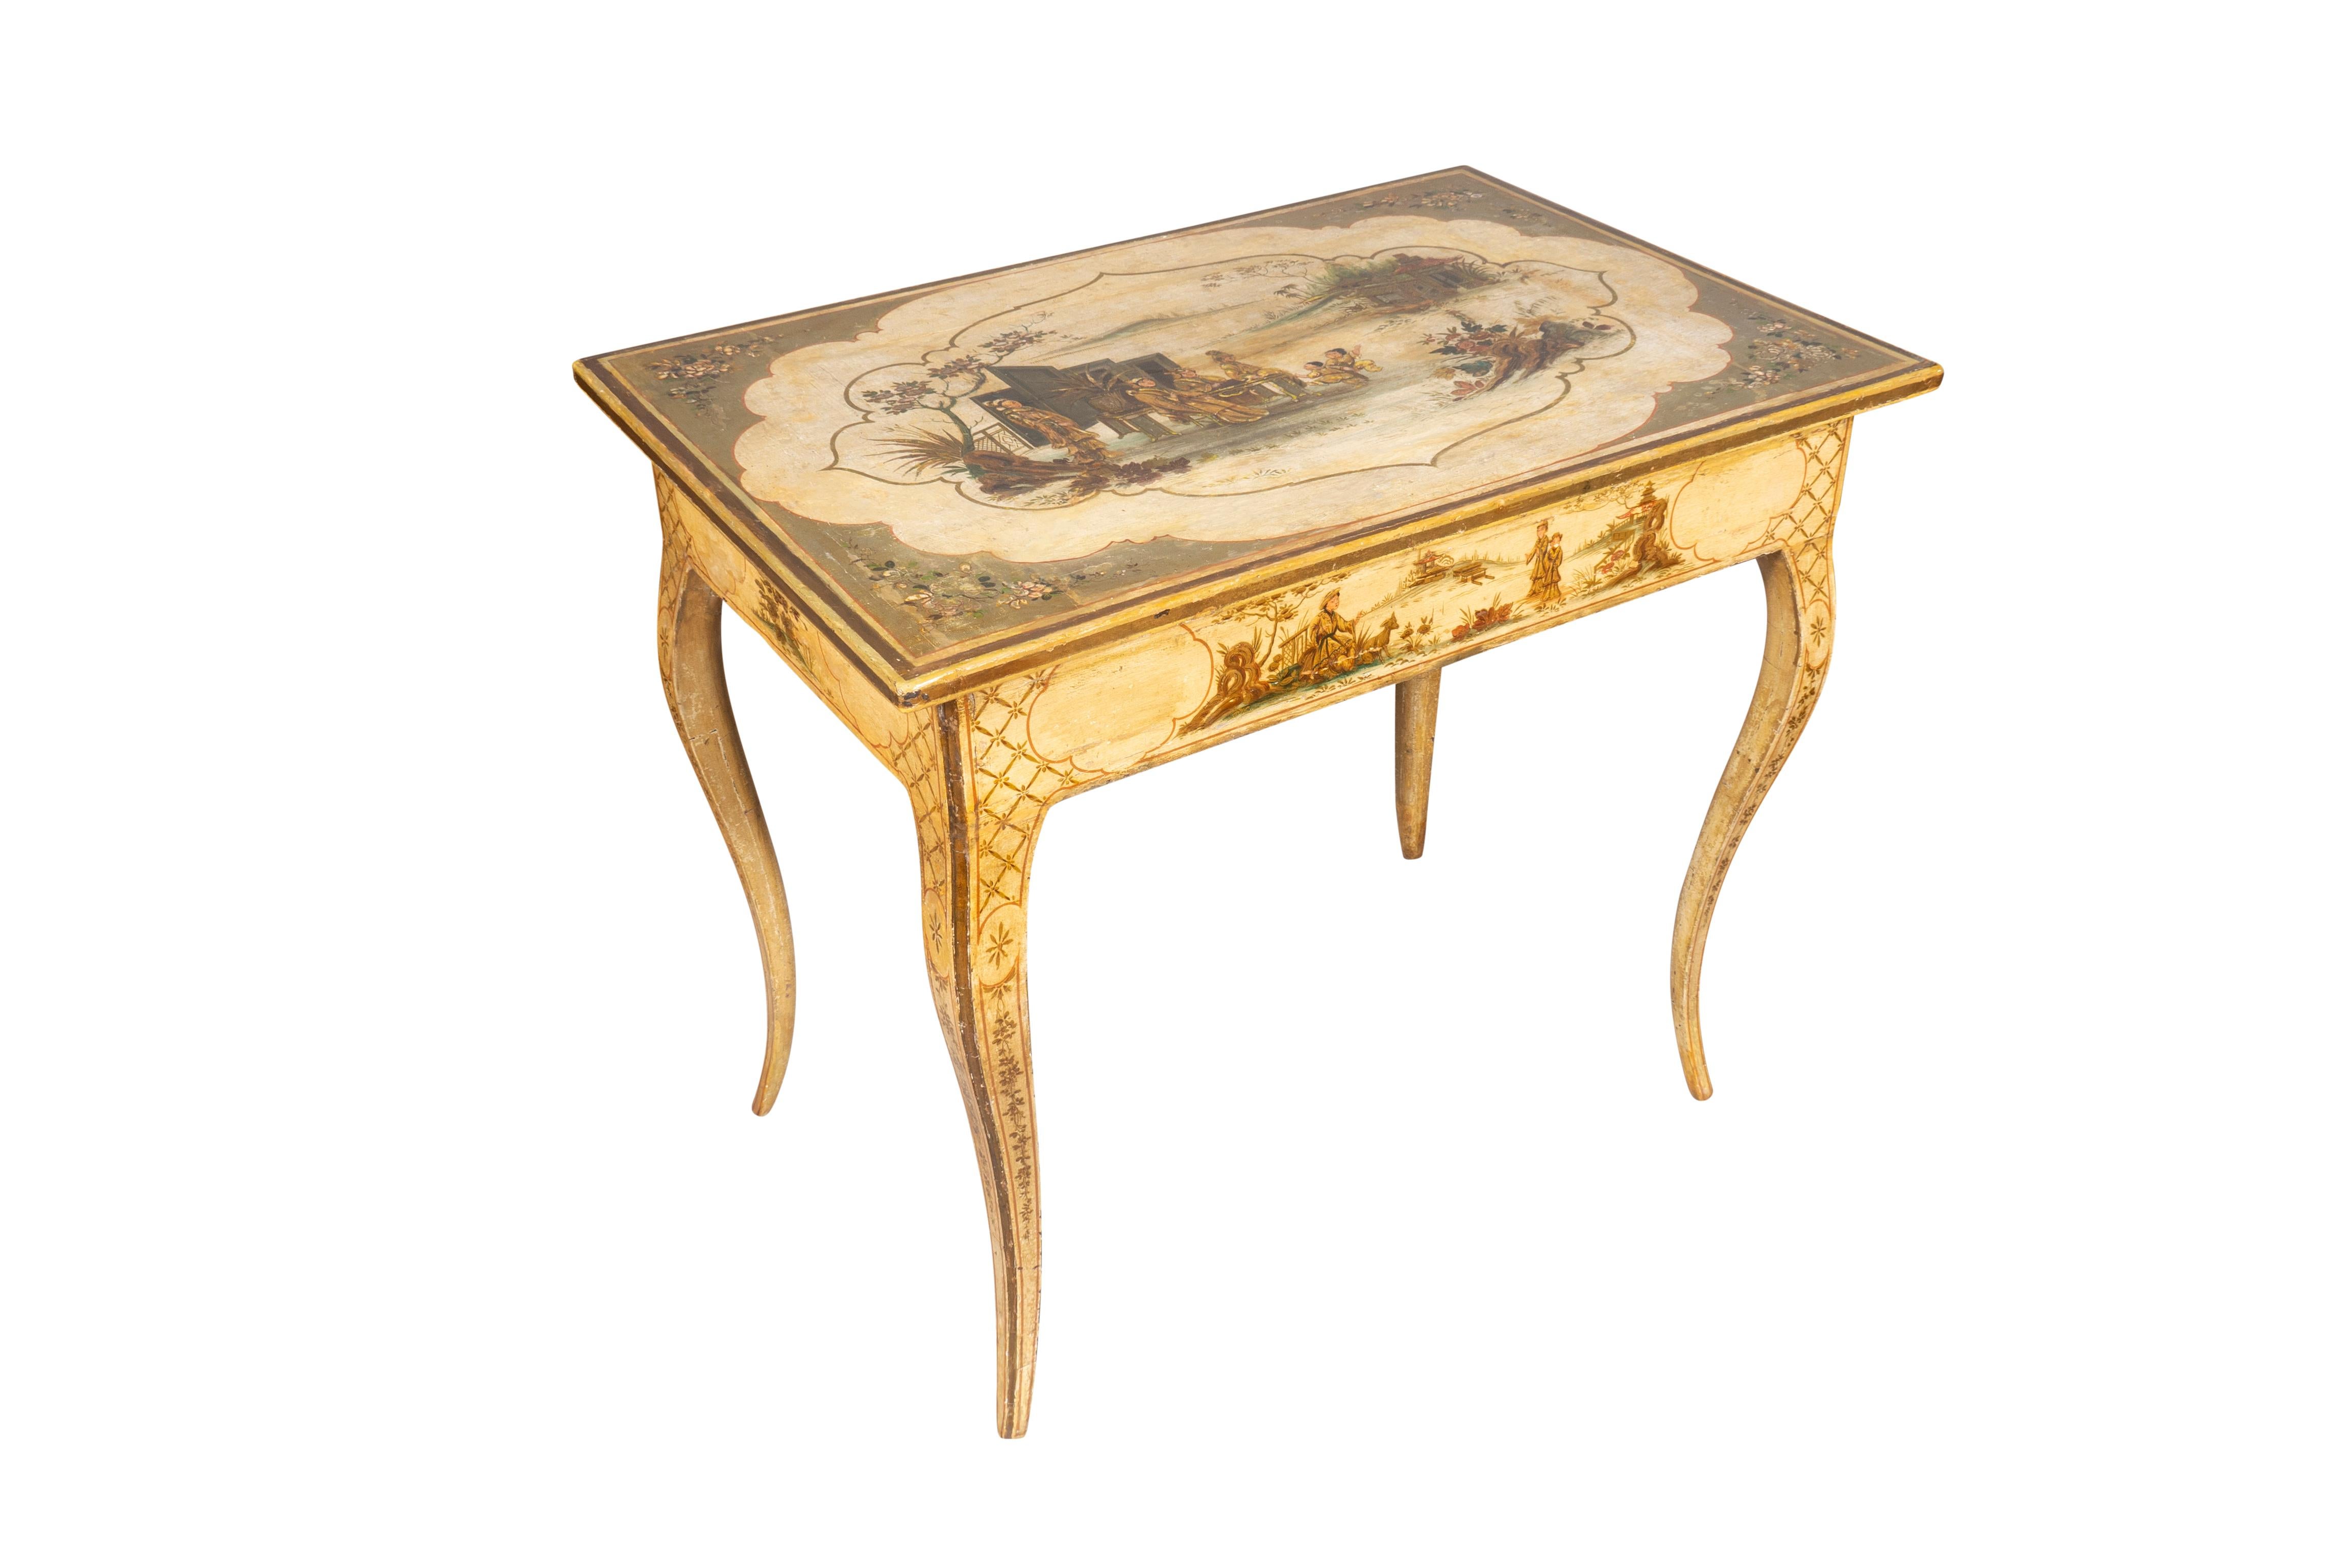 Italian Rococo Chinoiserie Decorated Table In Good Condition For Sale In Essex, MA